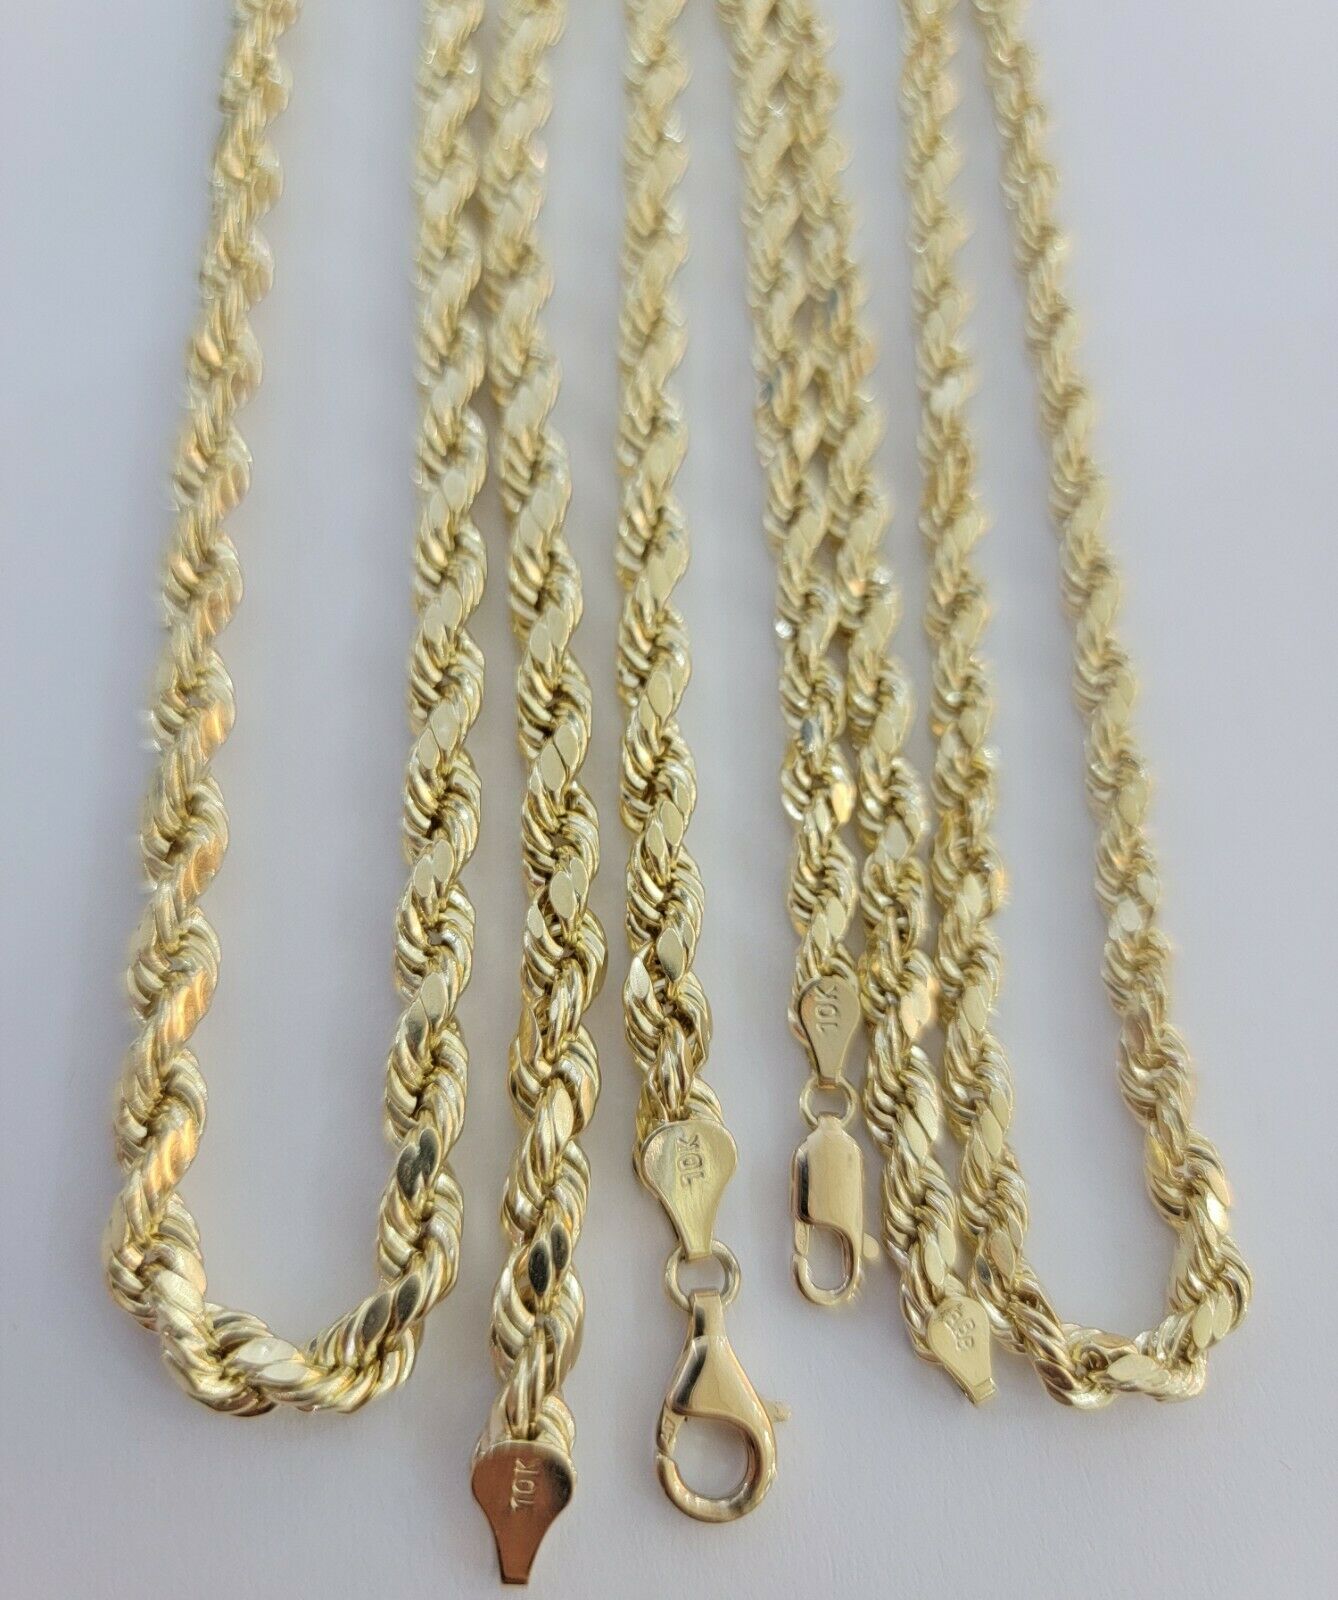 Real Gold 10k Rope Chain Necklace 5mm 18"-30" Inch Yellow Gold Diamond Cut Men's